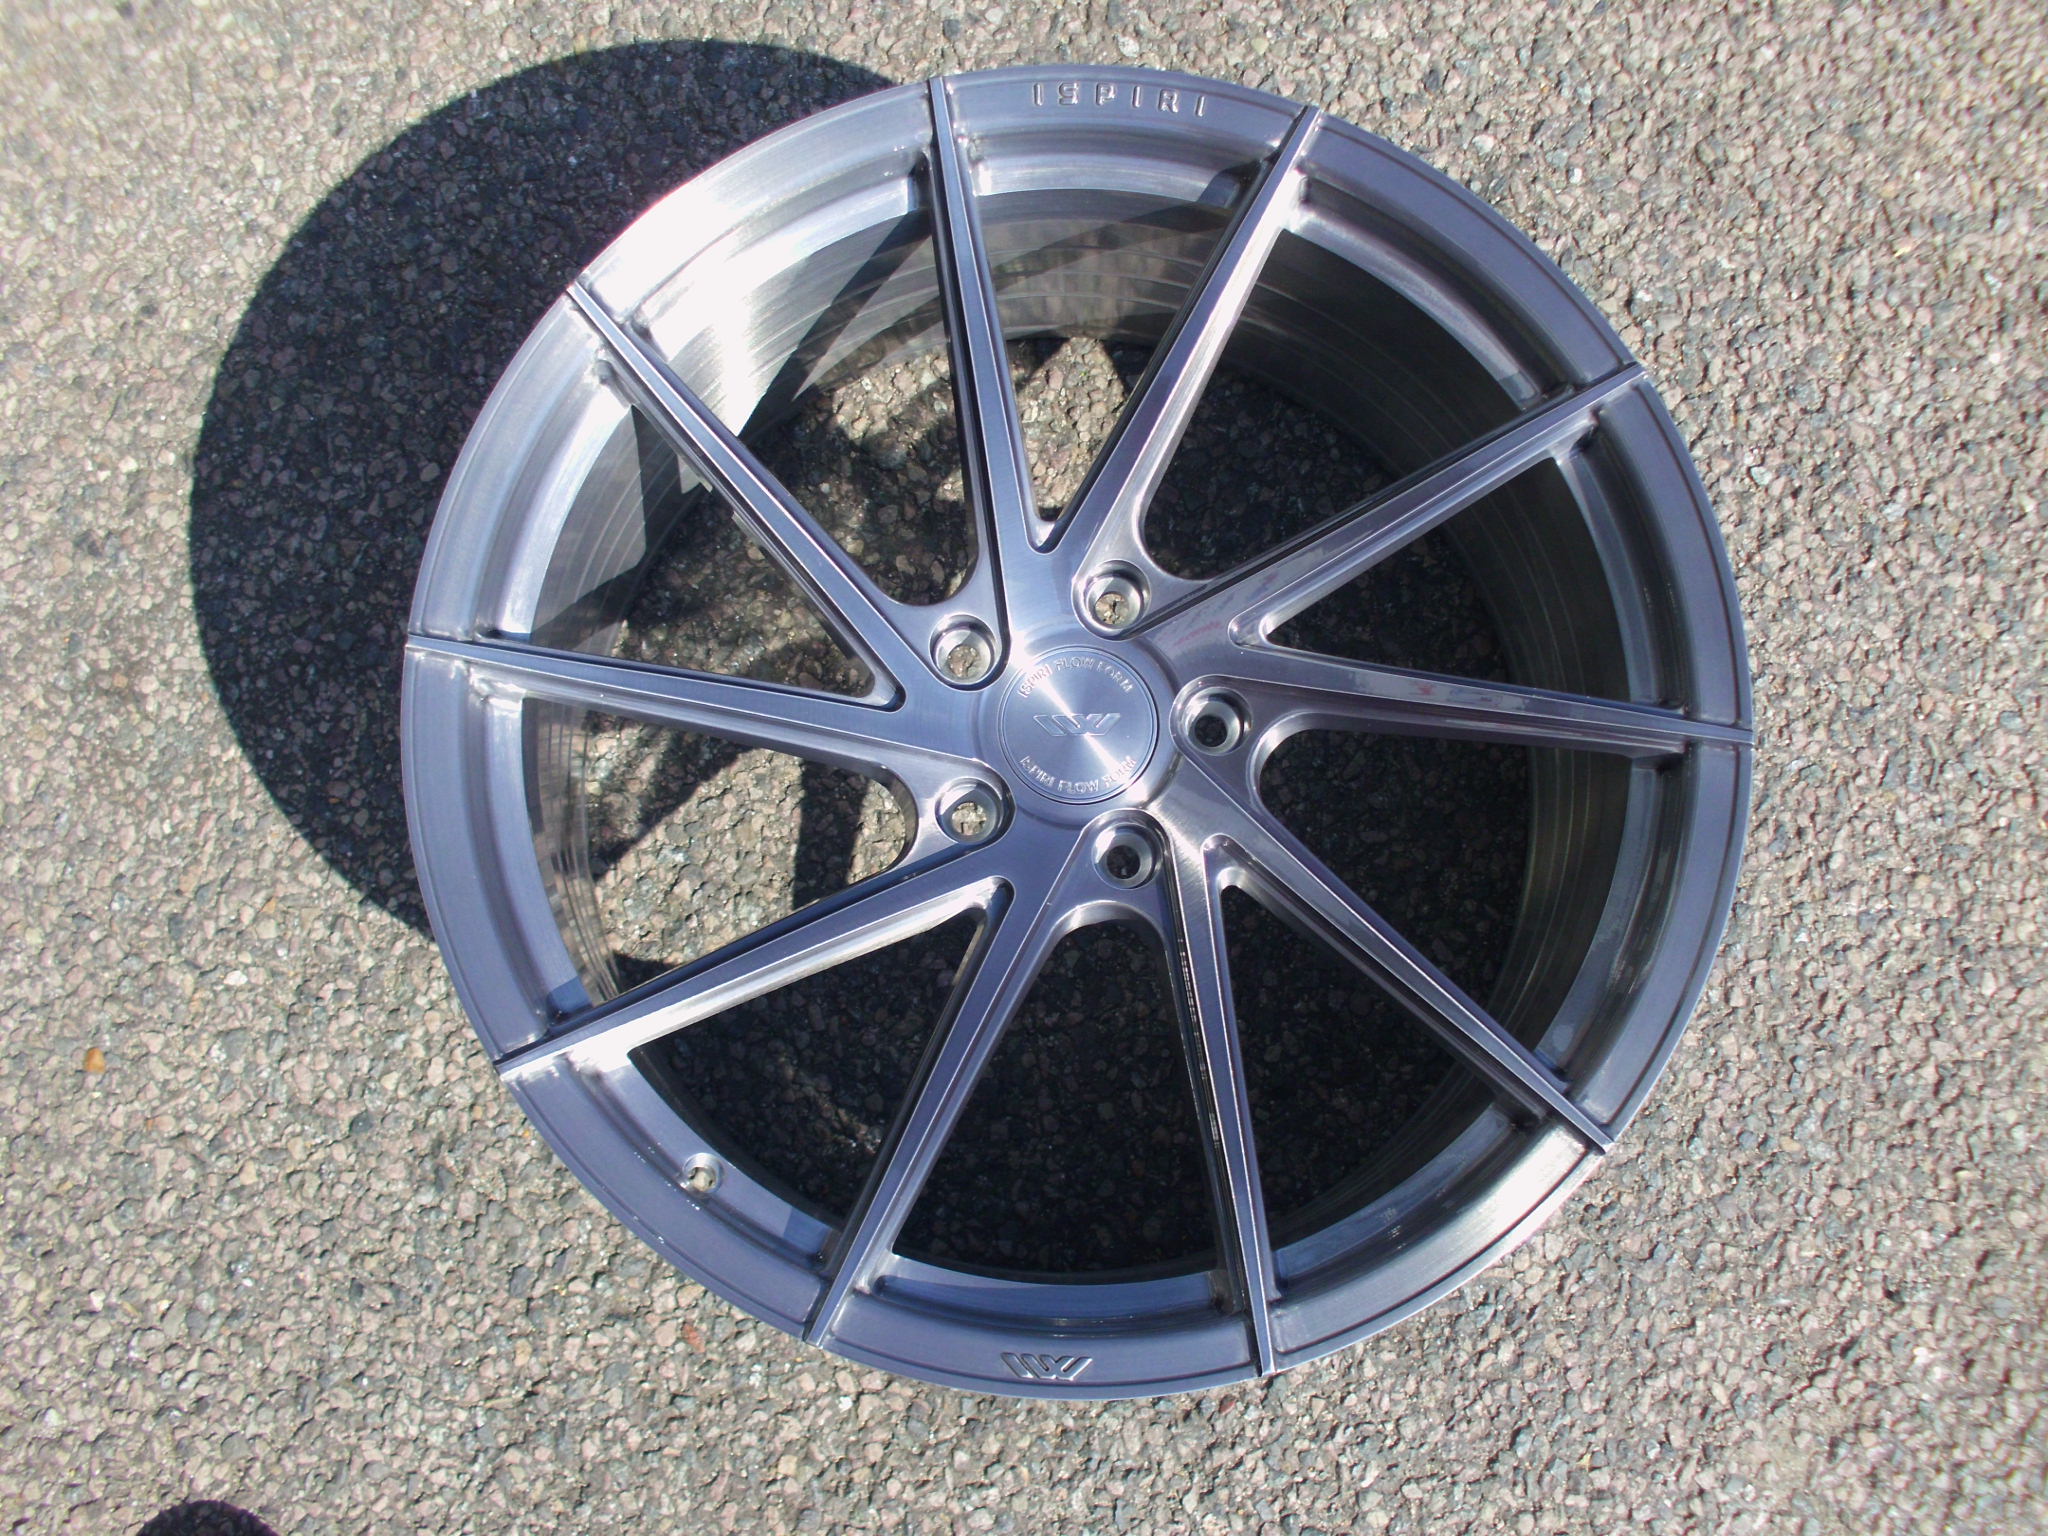 NEW 20  ISPIRI FFR1D MULTI SPOKE DIRECTIONAL ALLOY WHEELS IN FULL BRUSHED CARBON TITANIUM  DEEPER CONCAVE 10 5  REARS 5x120